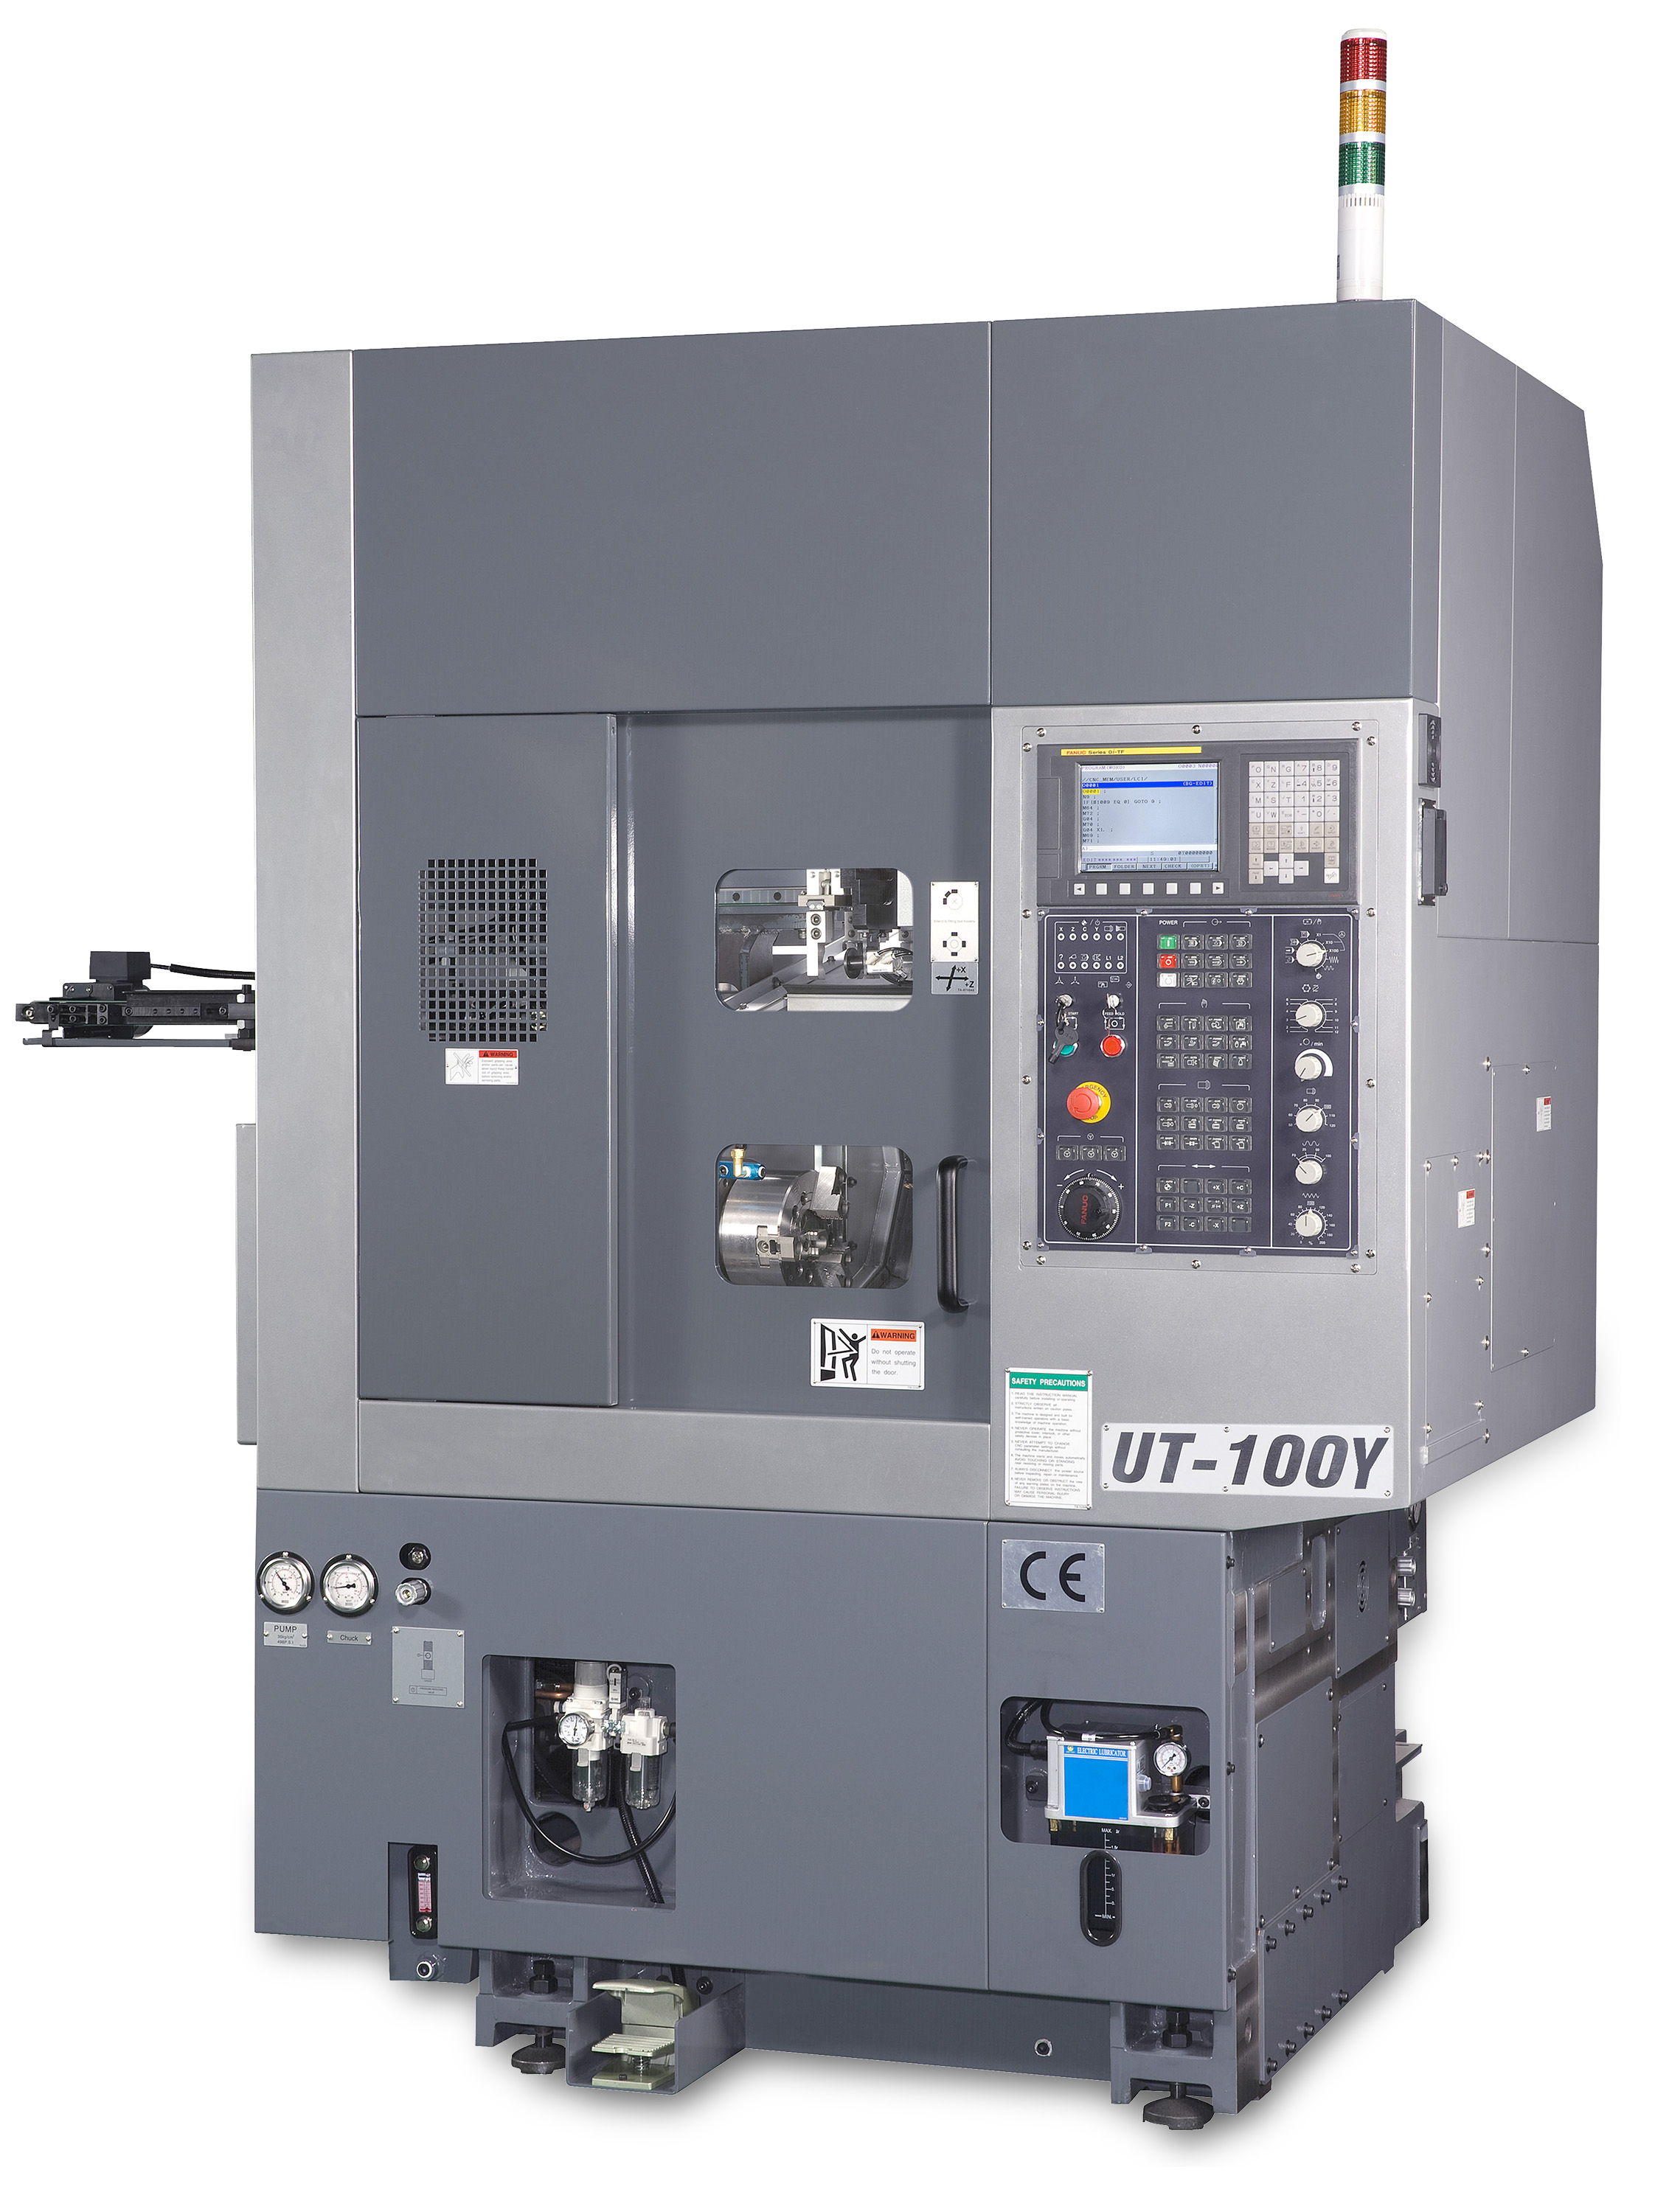 Products|Compact CNC Lathe for Automatic Machining UT-100Y